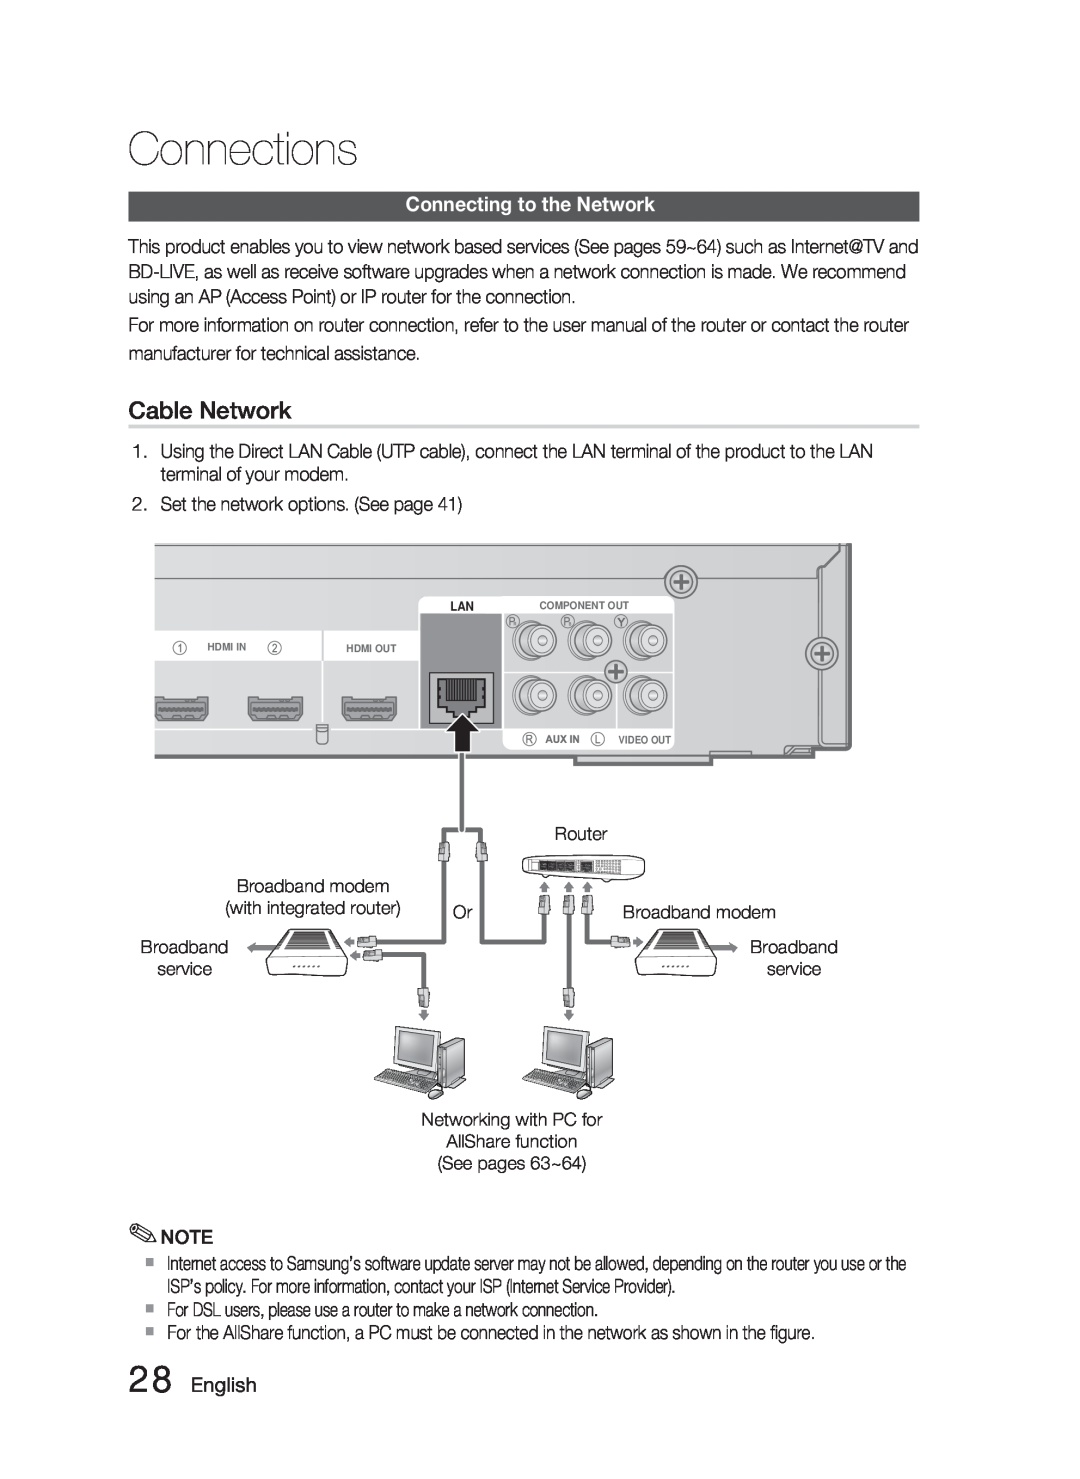 Samsung HT-C6900W user manual Cable Network, Connecting to the Network, English, Connections 